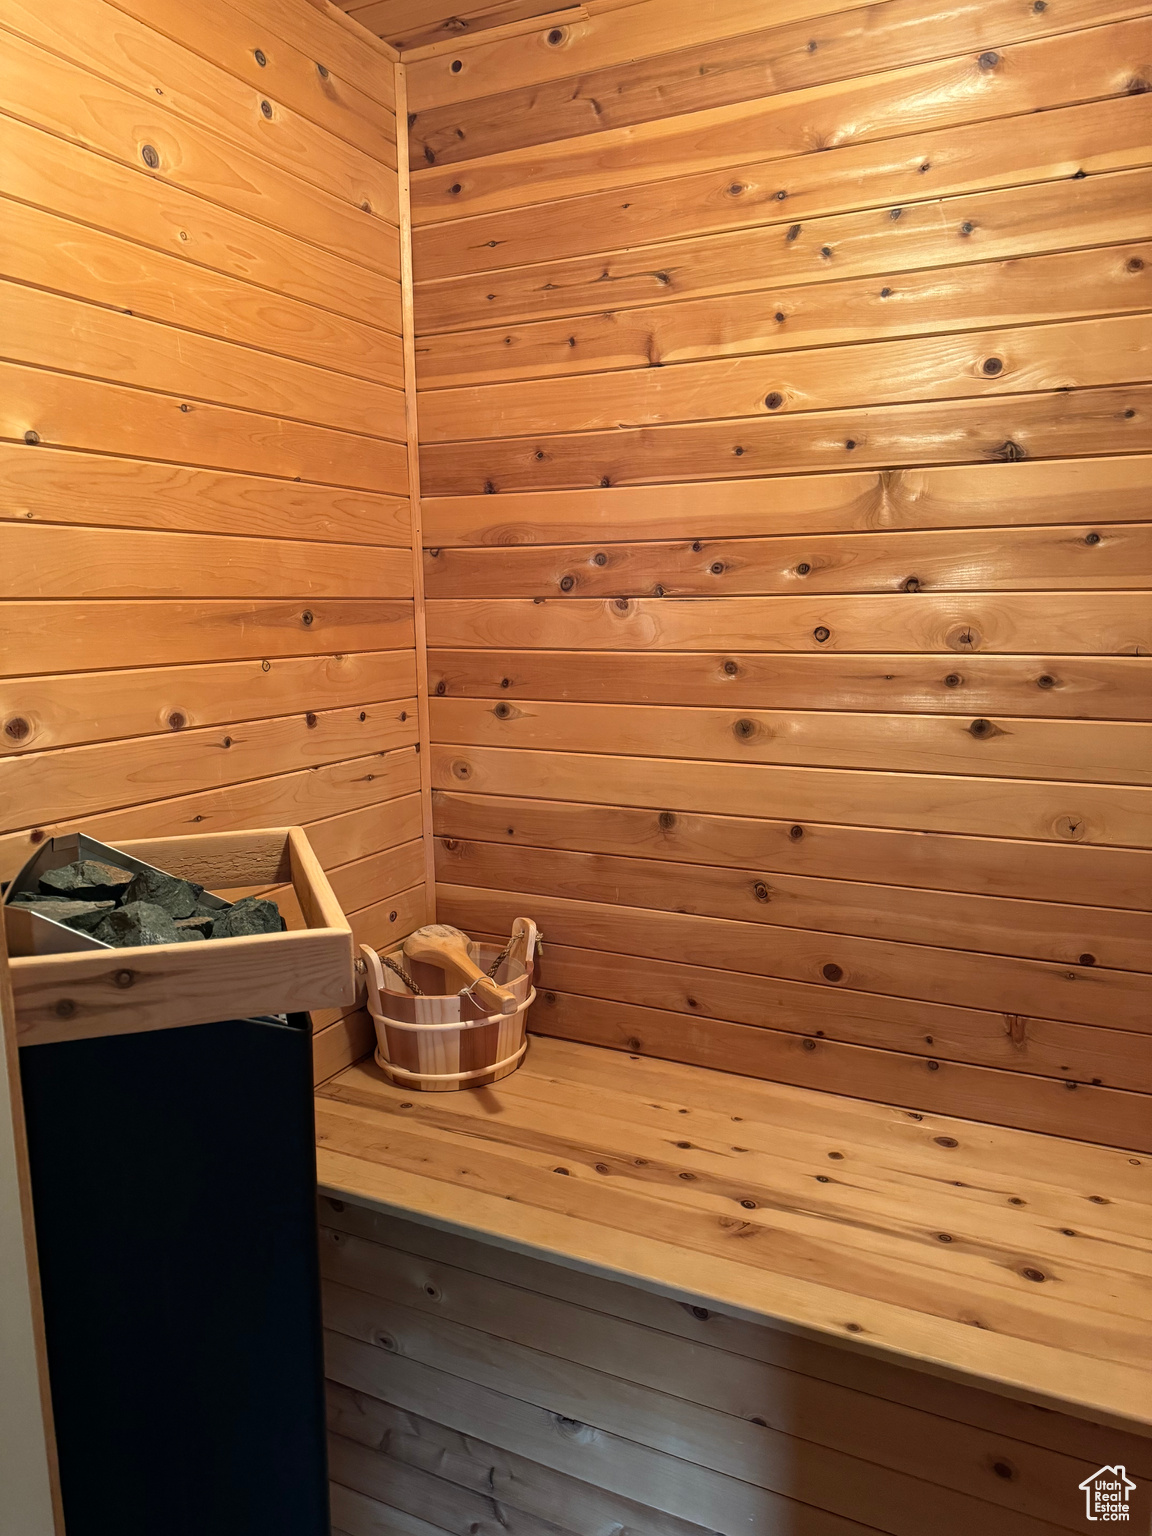 Relax and unwind in the sauna